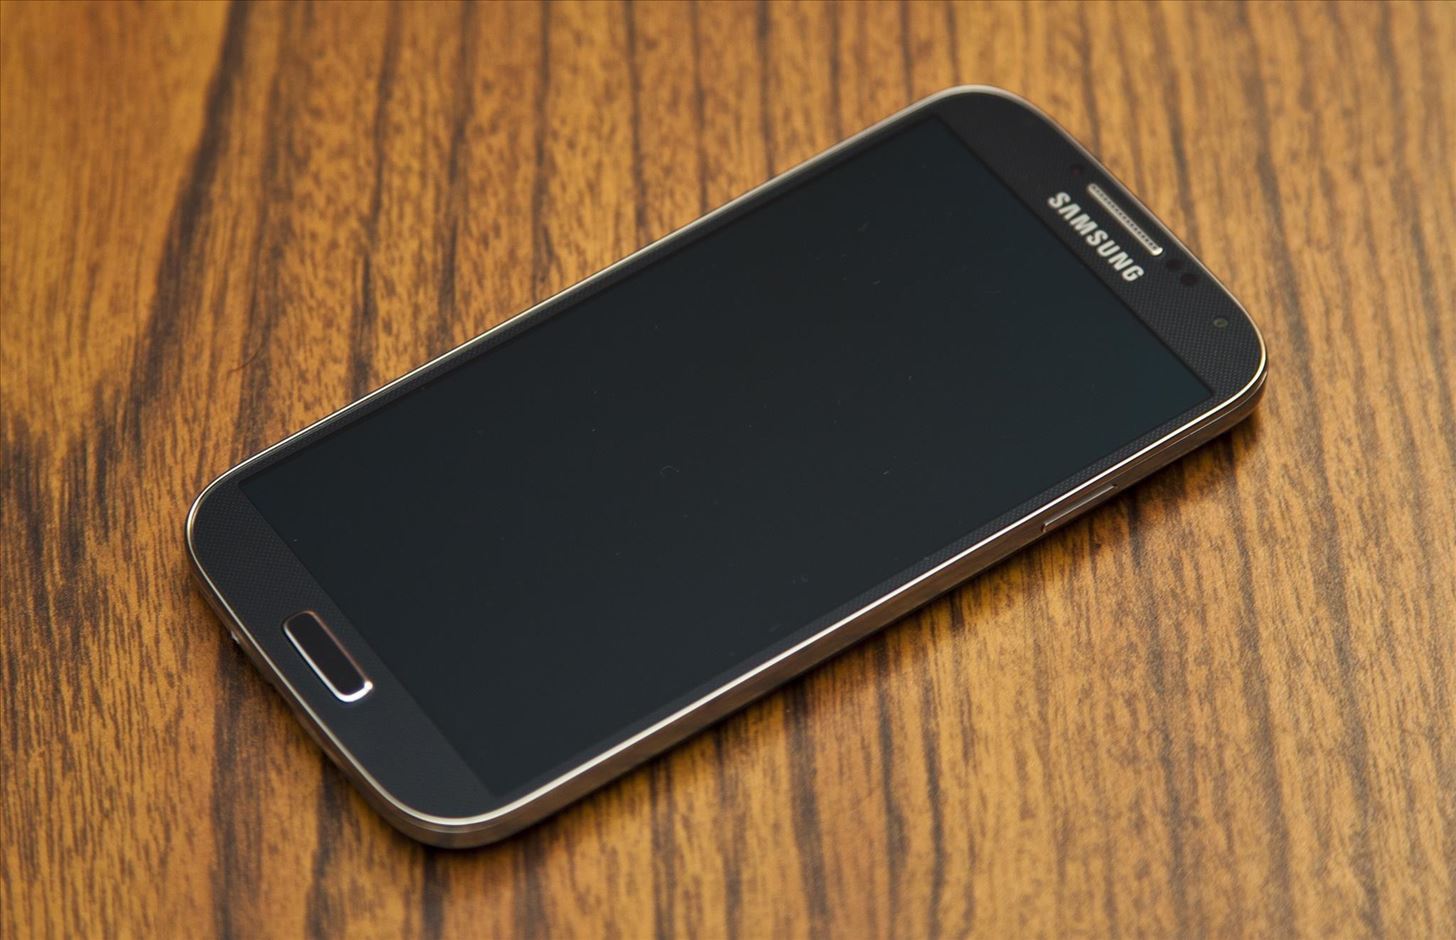 A softModder's Review of the Samsung Galaxy S4: "Best Android Phone on the Market"